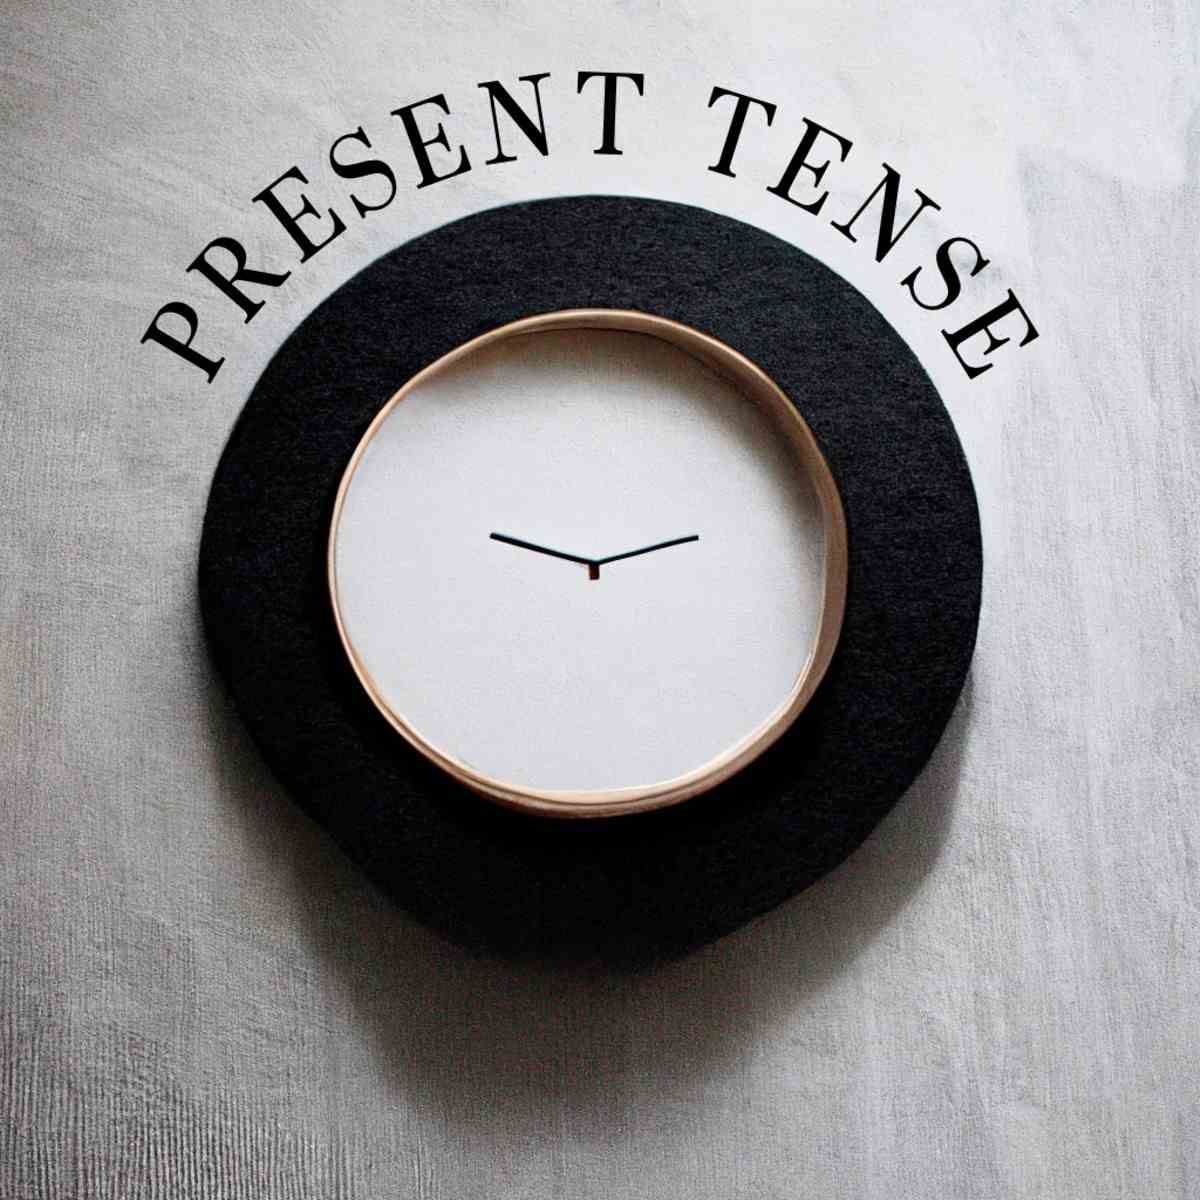 Why write in present tense?